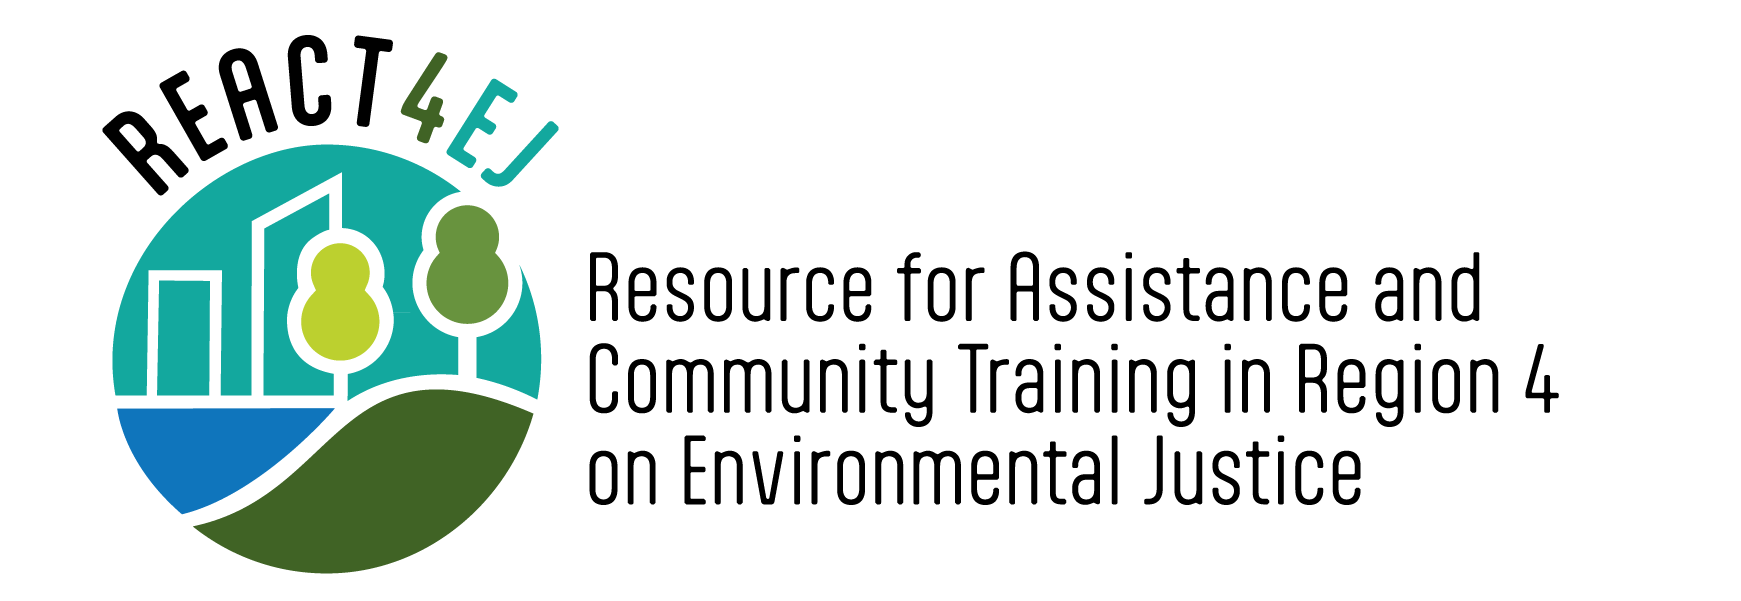 Resource for Assistance and Community Training in Region 4 on Environmental Justice logo